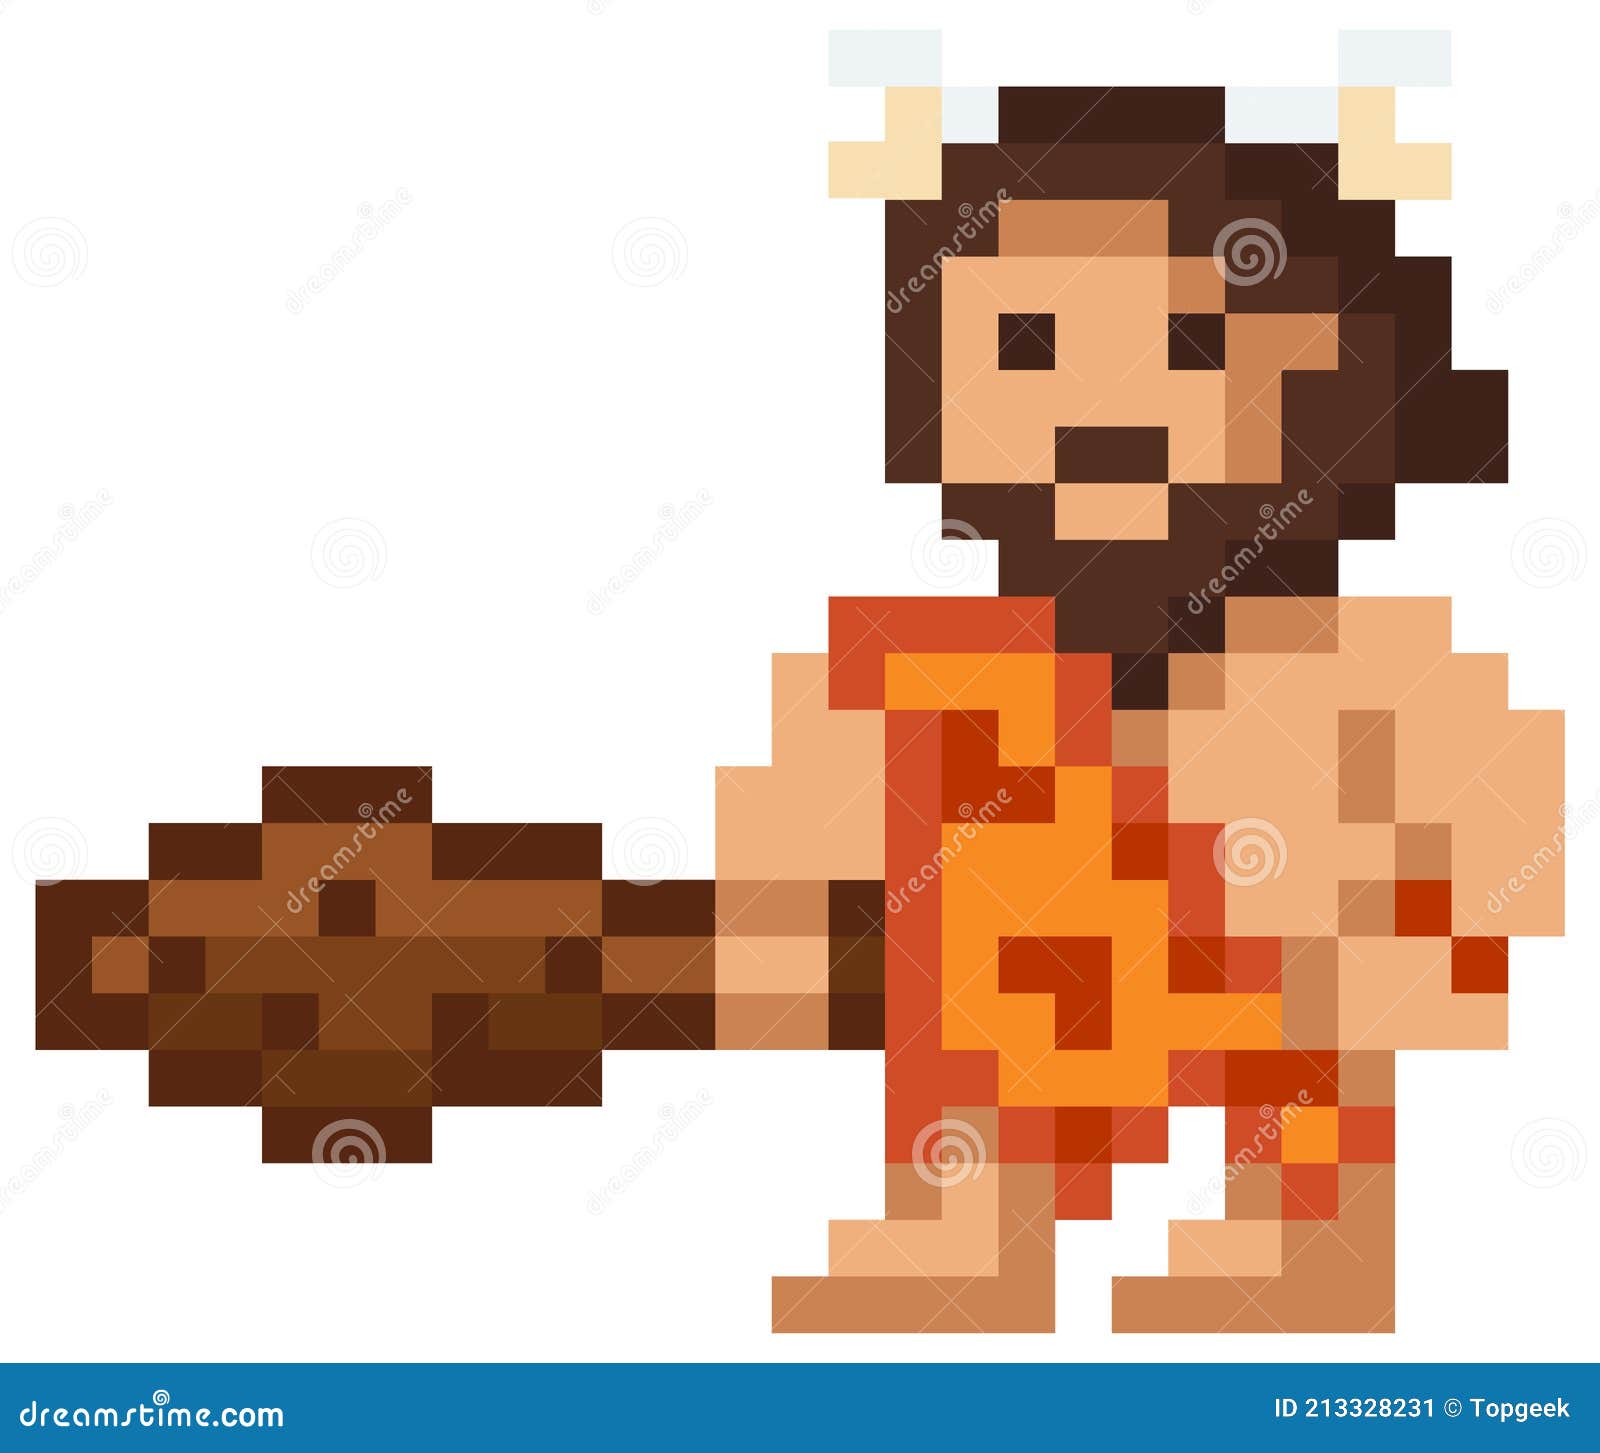 Man Pixelated Clipart Transparent Background, Vector Pixel Game